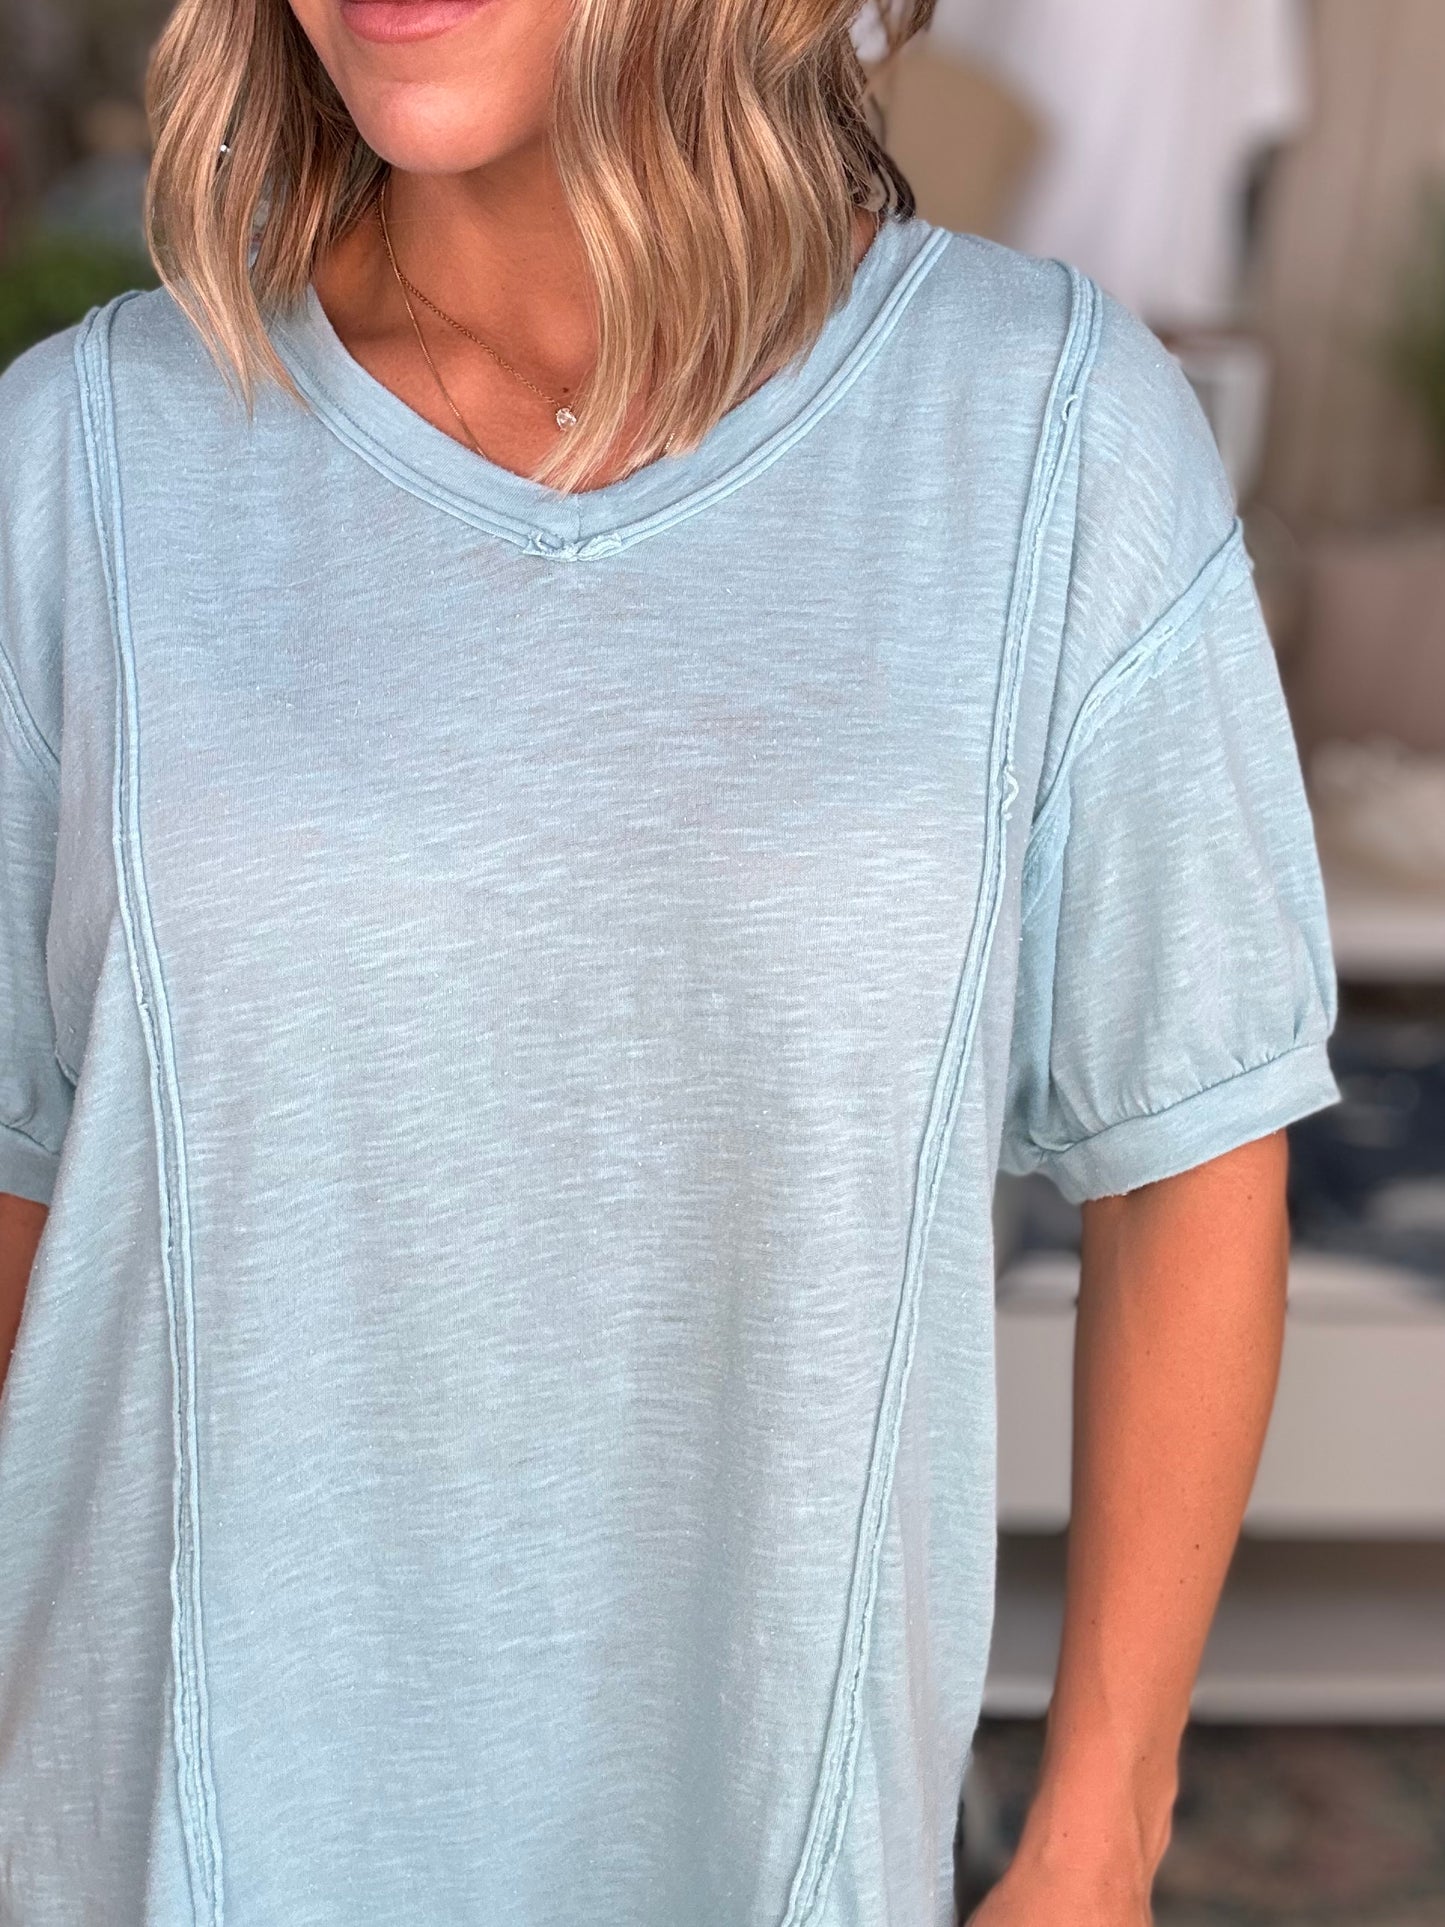 NEW! By the Seashore top